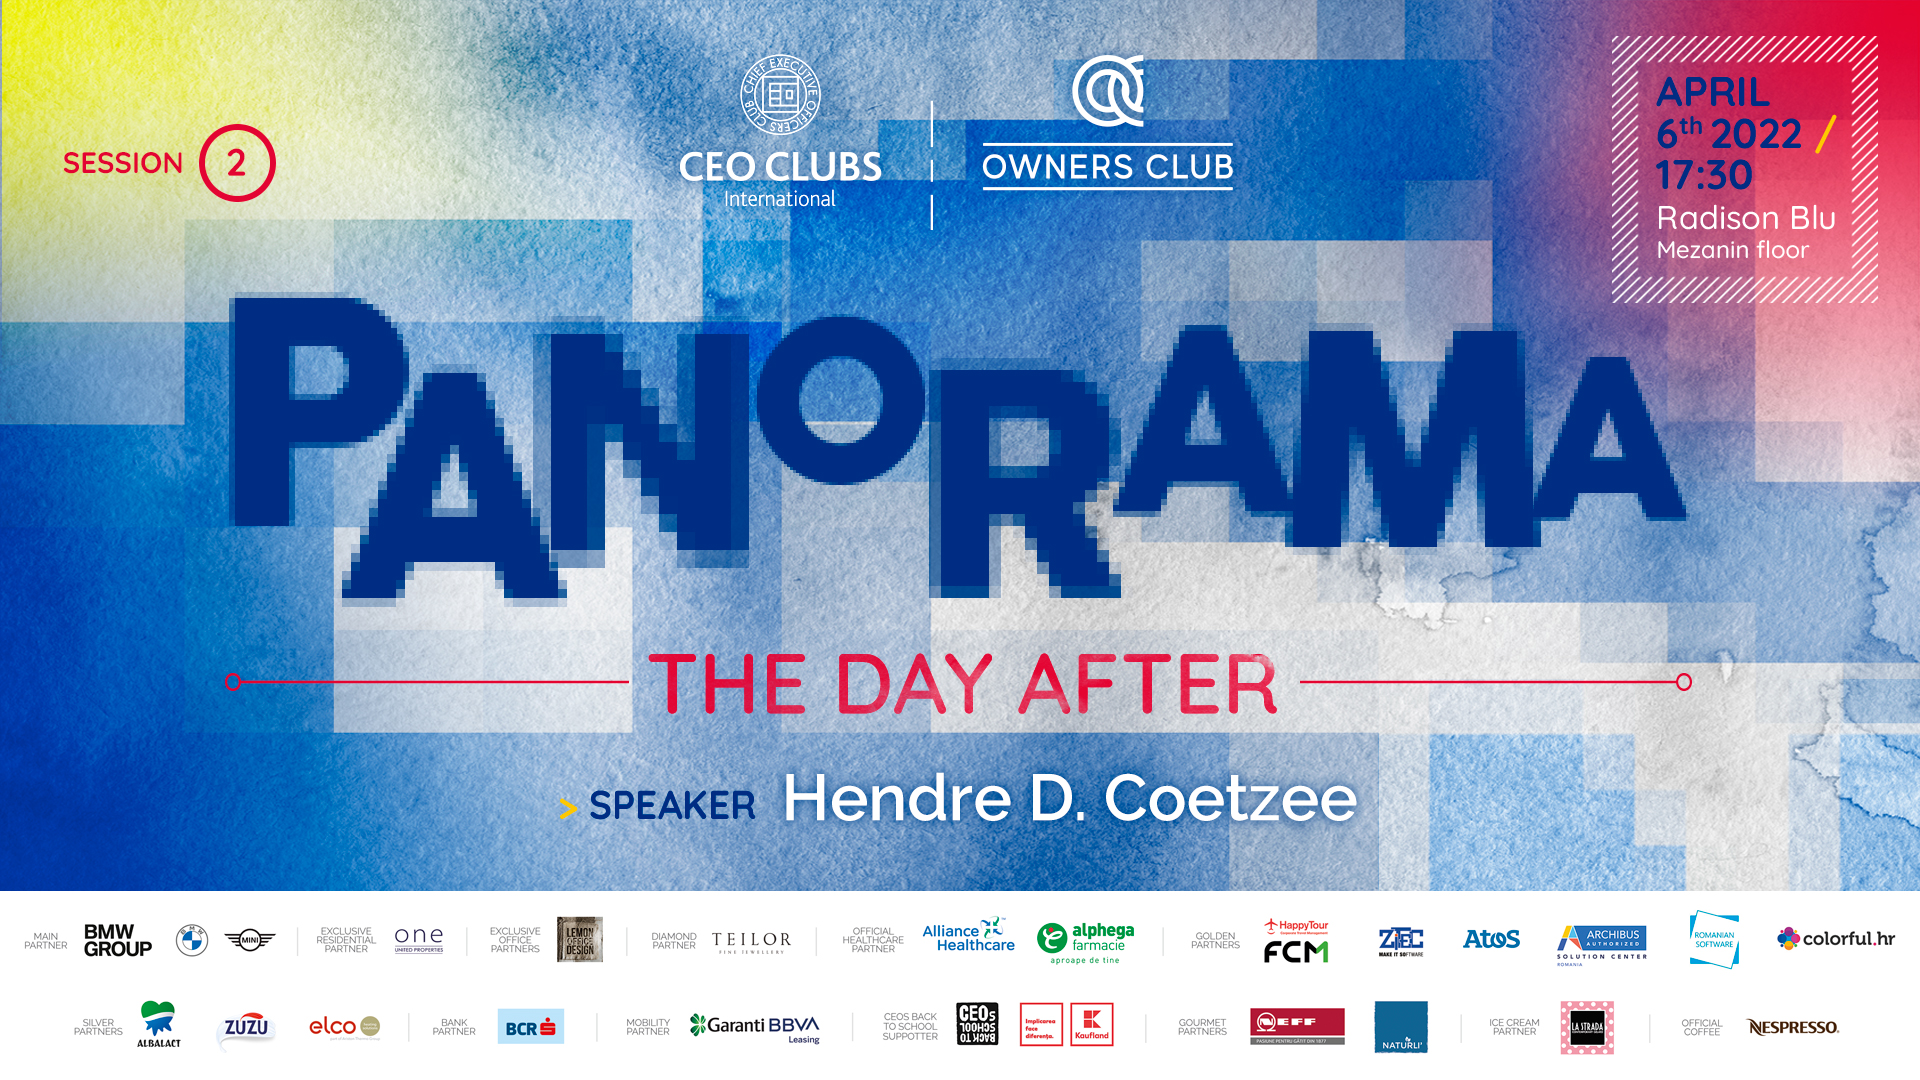 CEO Clubs & Owners Club Panorama: The Day After